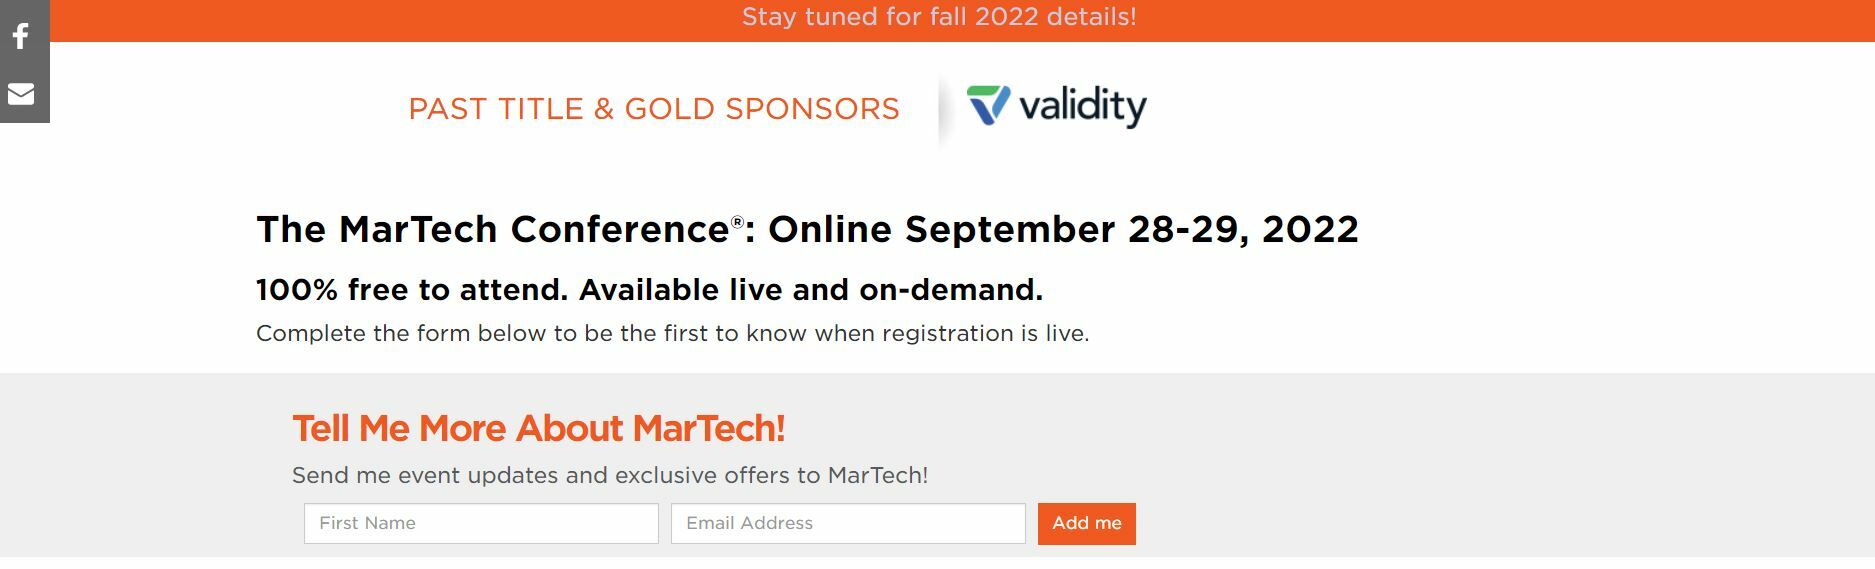 The MarTech Conference: Fall.